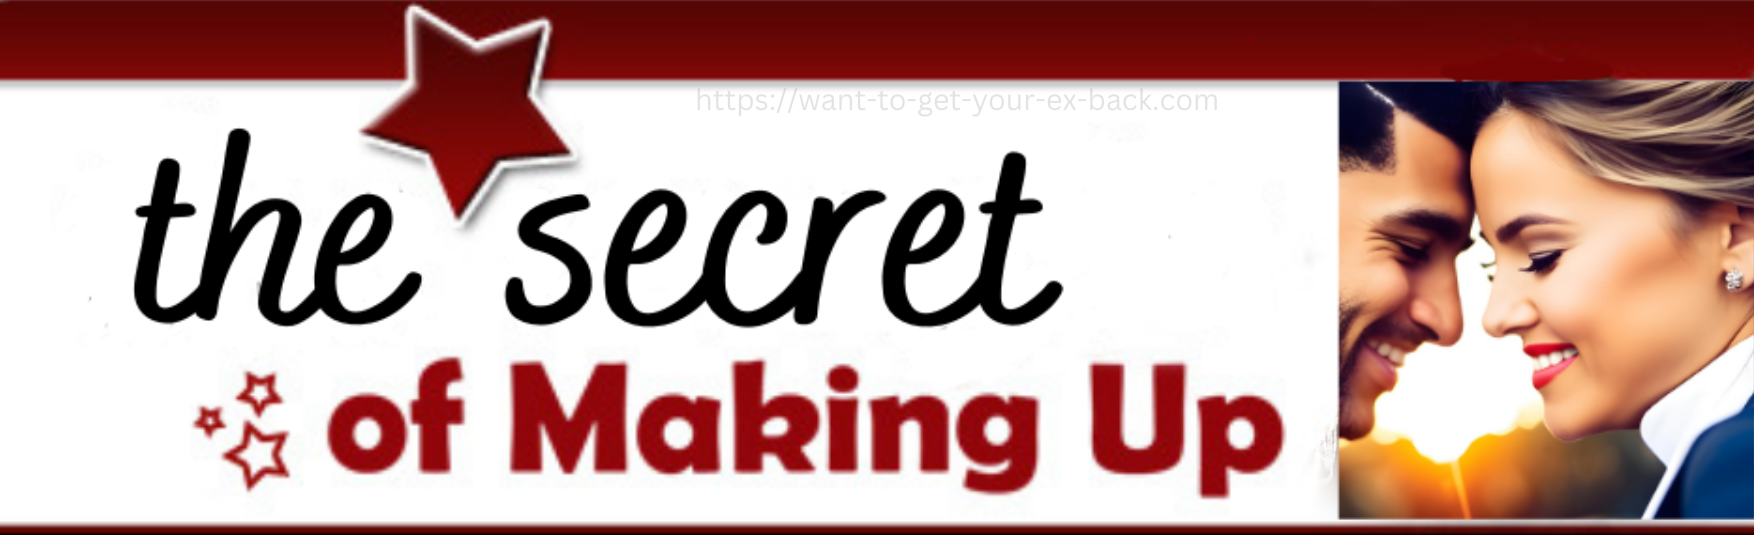 Steps to get your ex back with the Magic of Making Up.